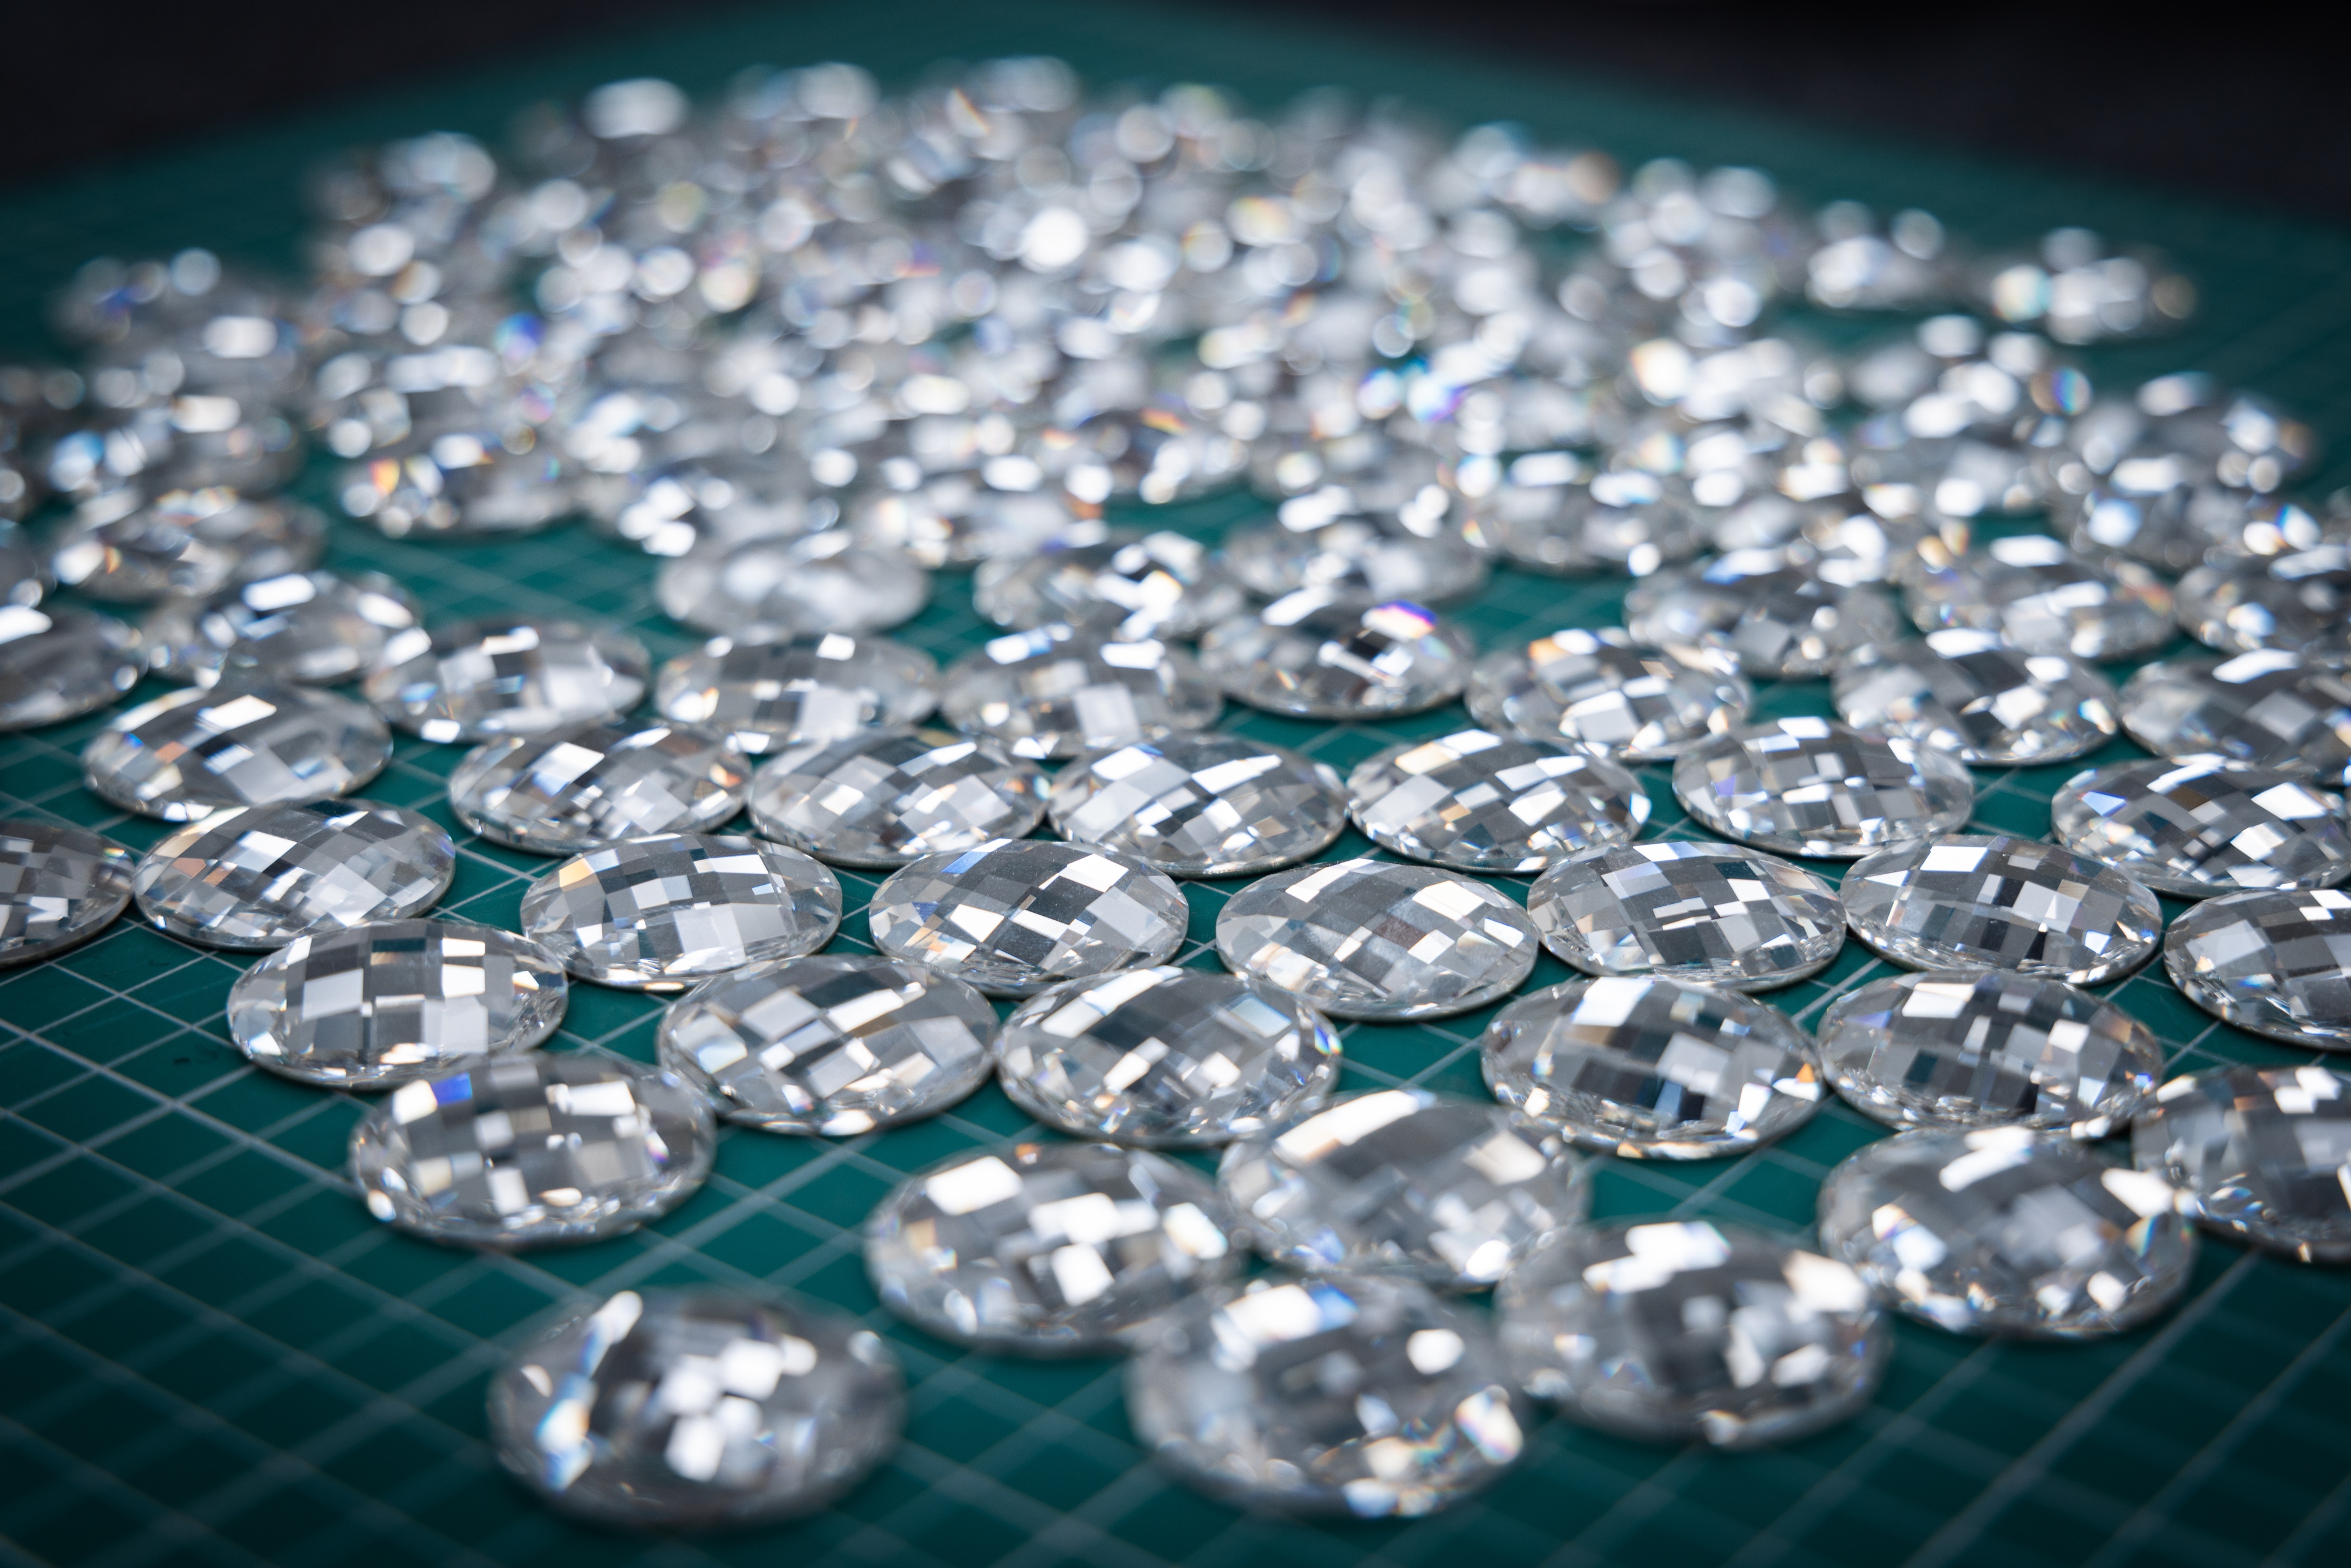 Many Swarovski crystals laid out on a surface